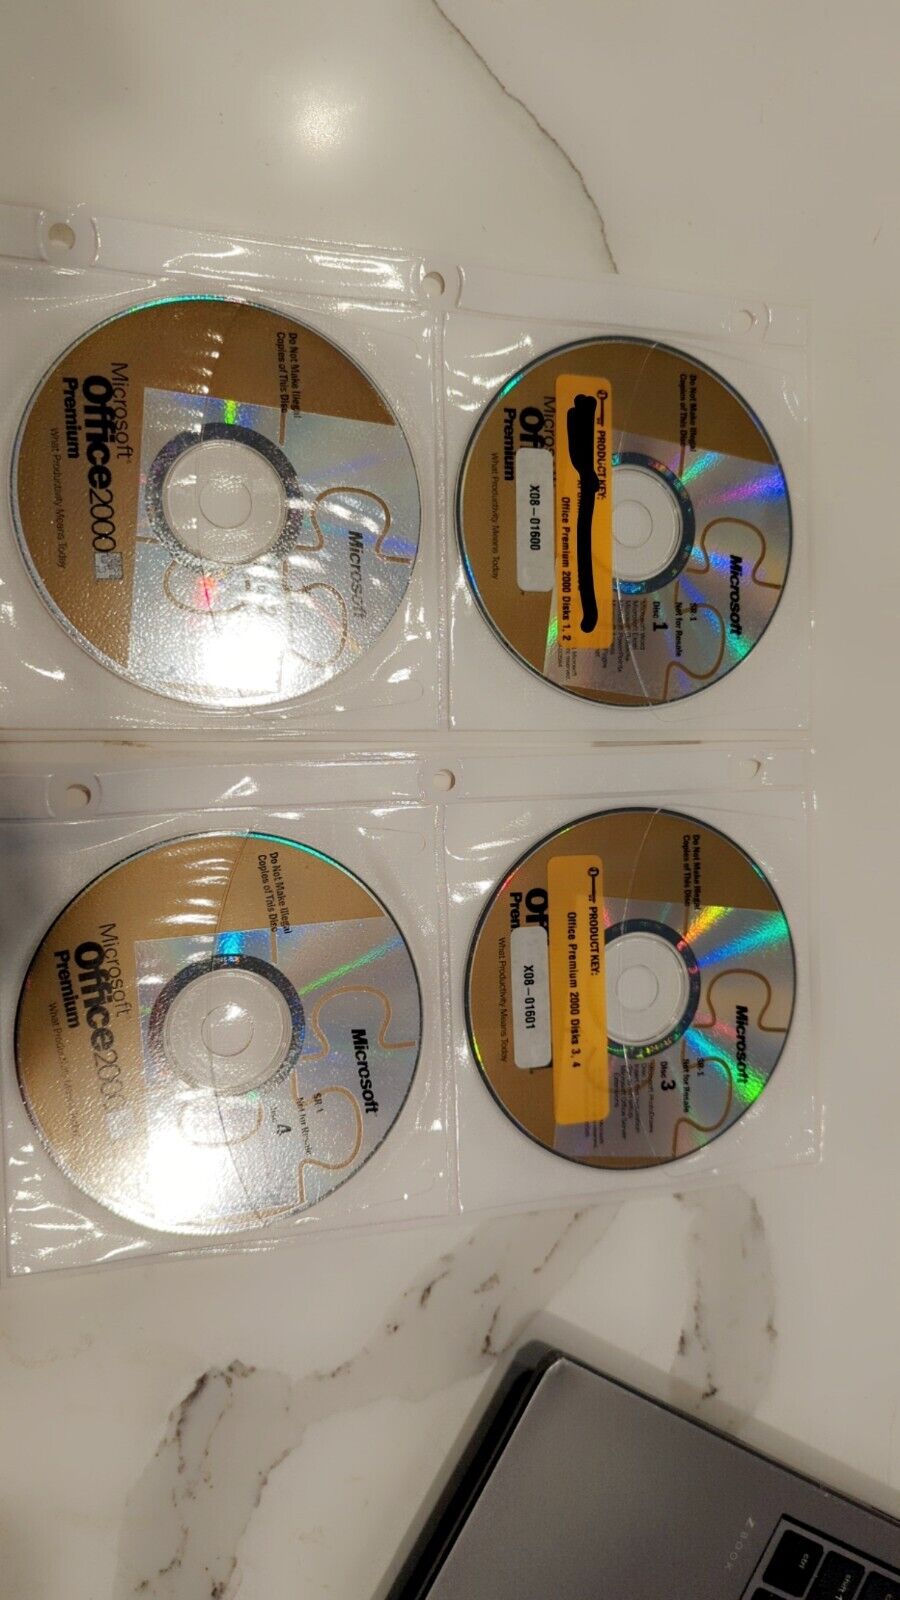 Vintage Microsoft Office 2000 Premium 4 CD Disc Set with Product License Key